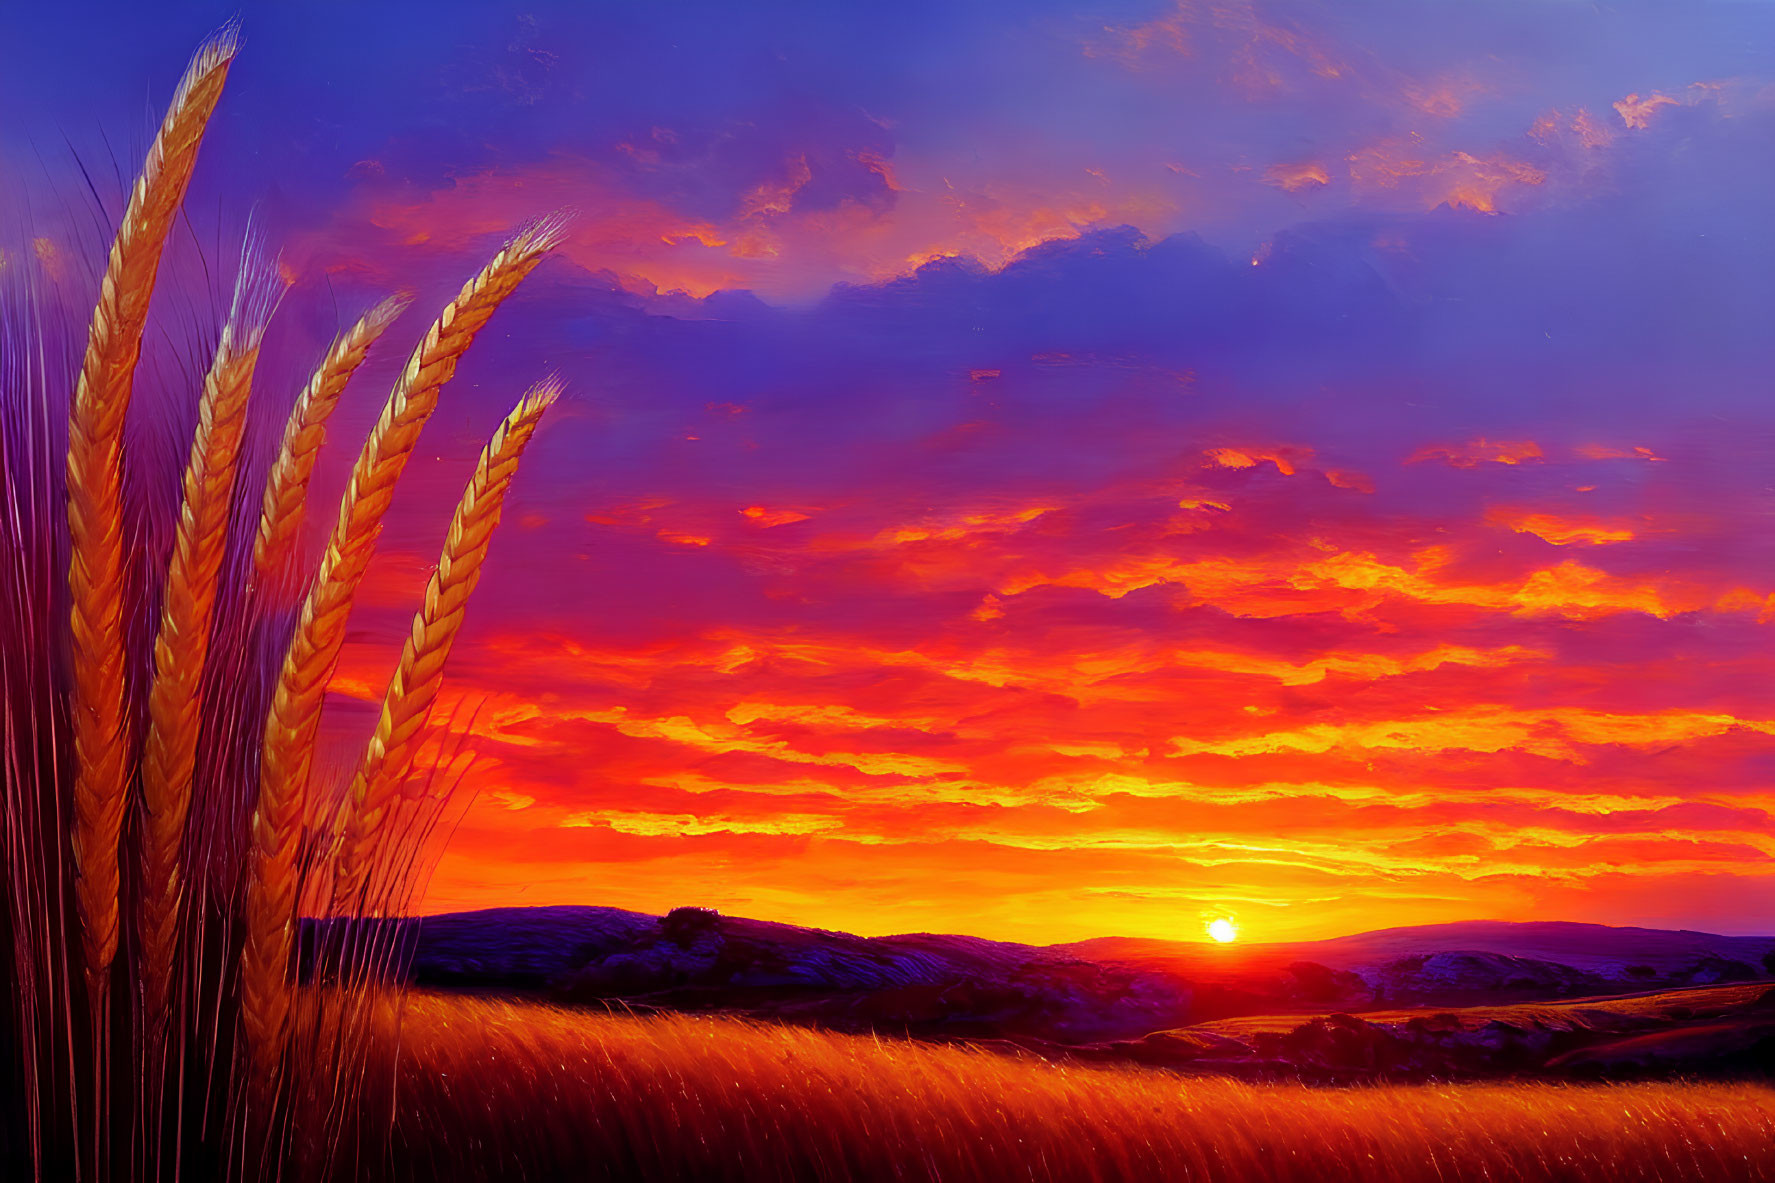 Vibrant painting of golden wheat against a vivid sunset